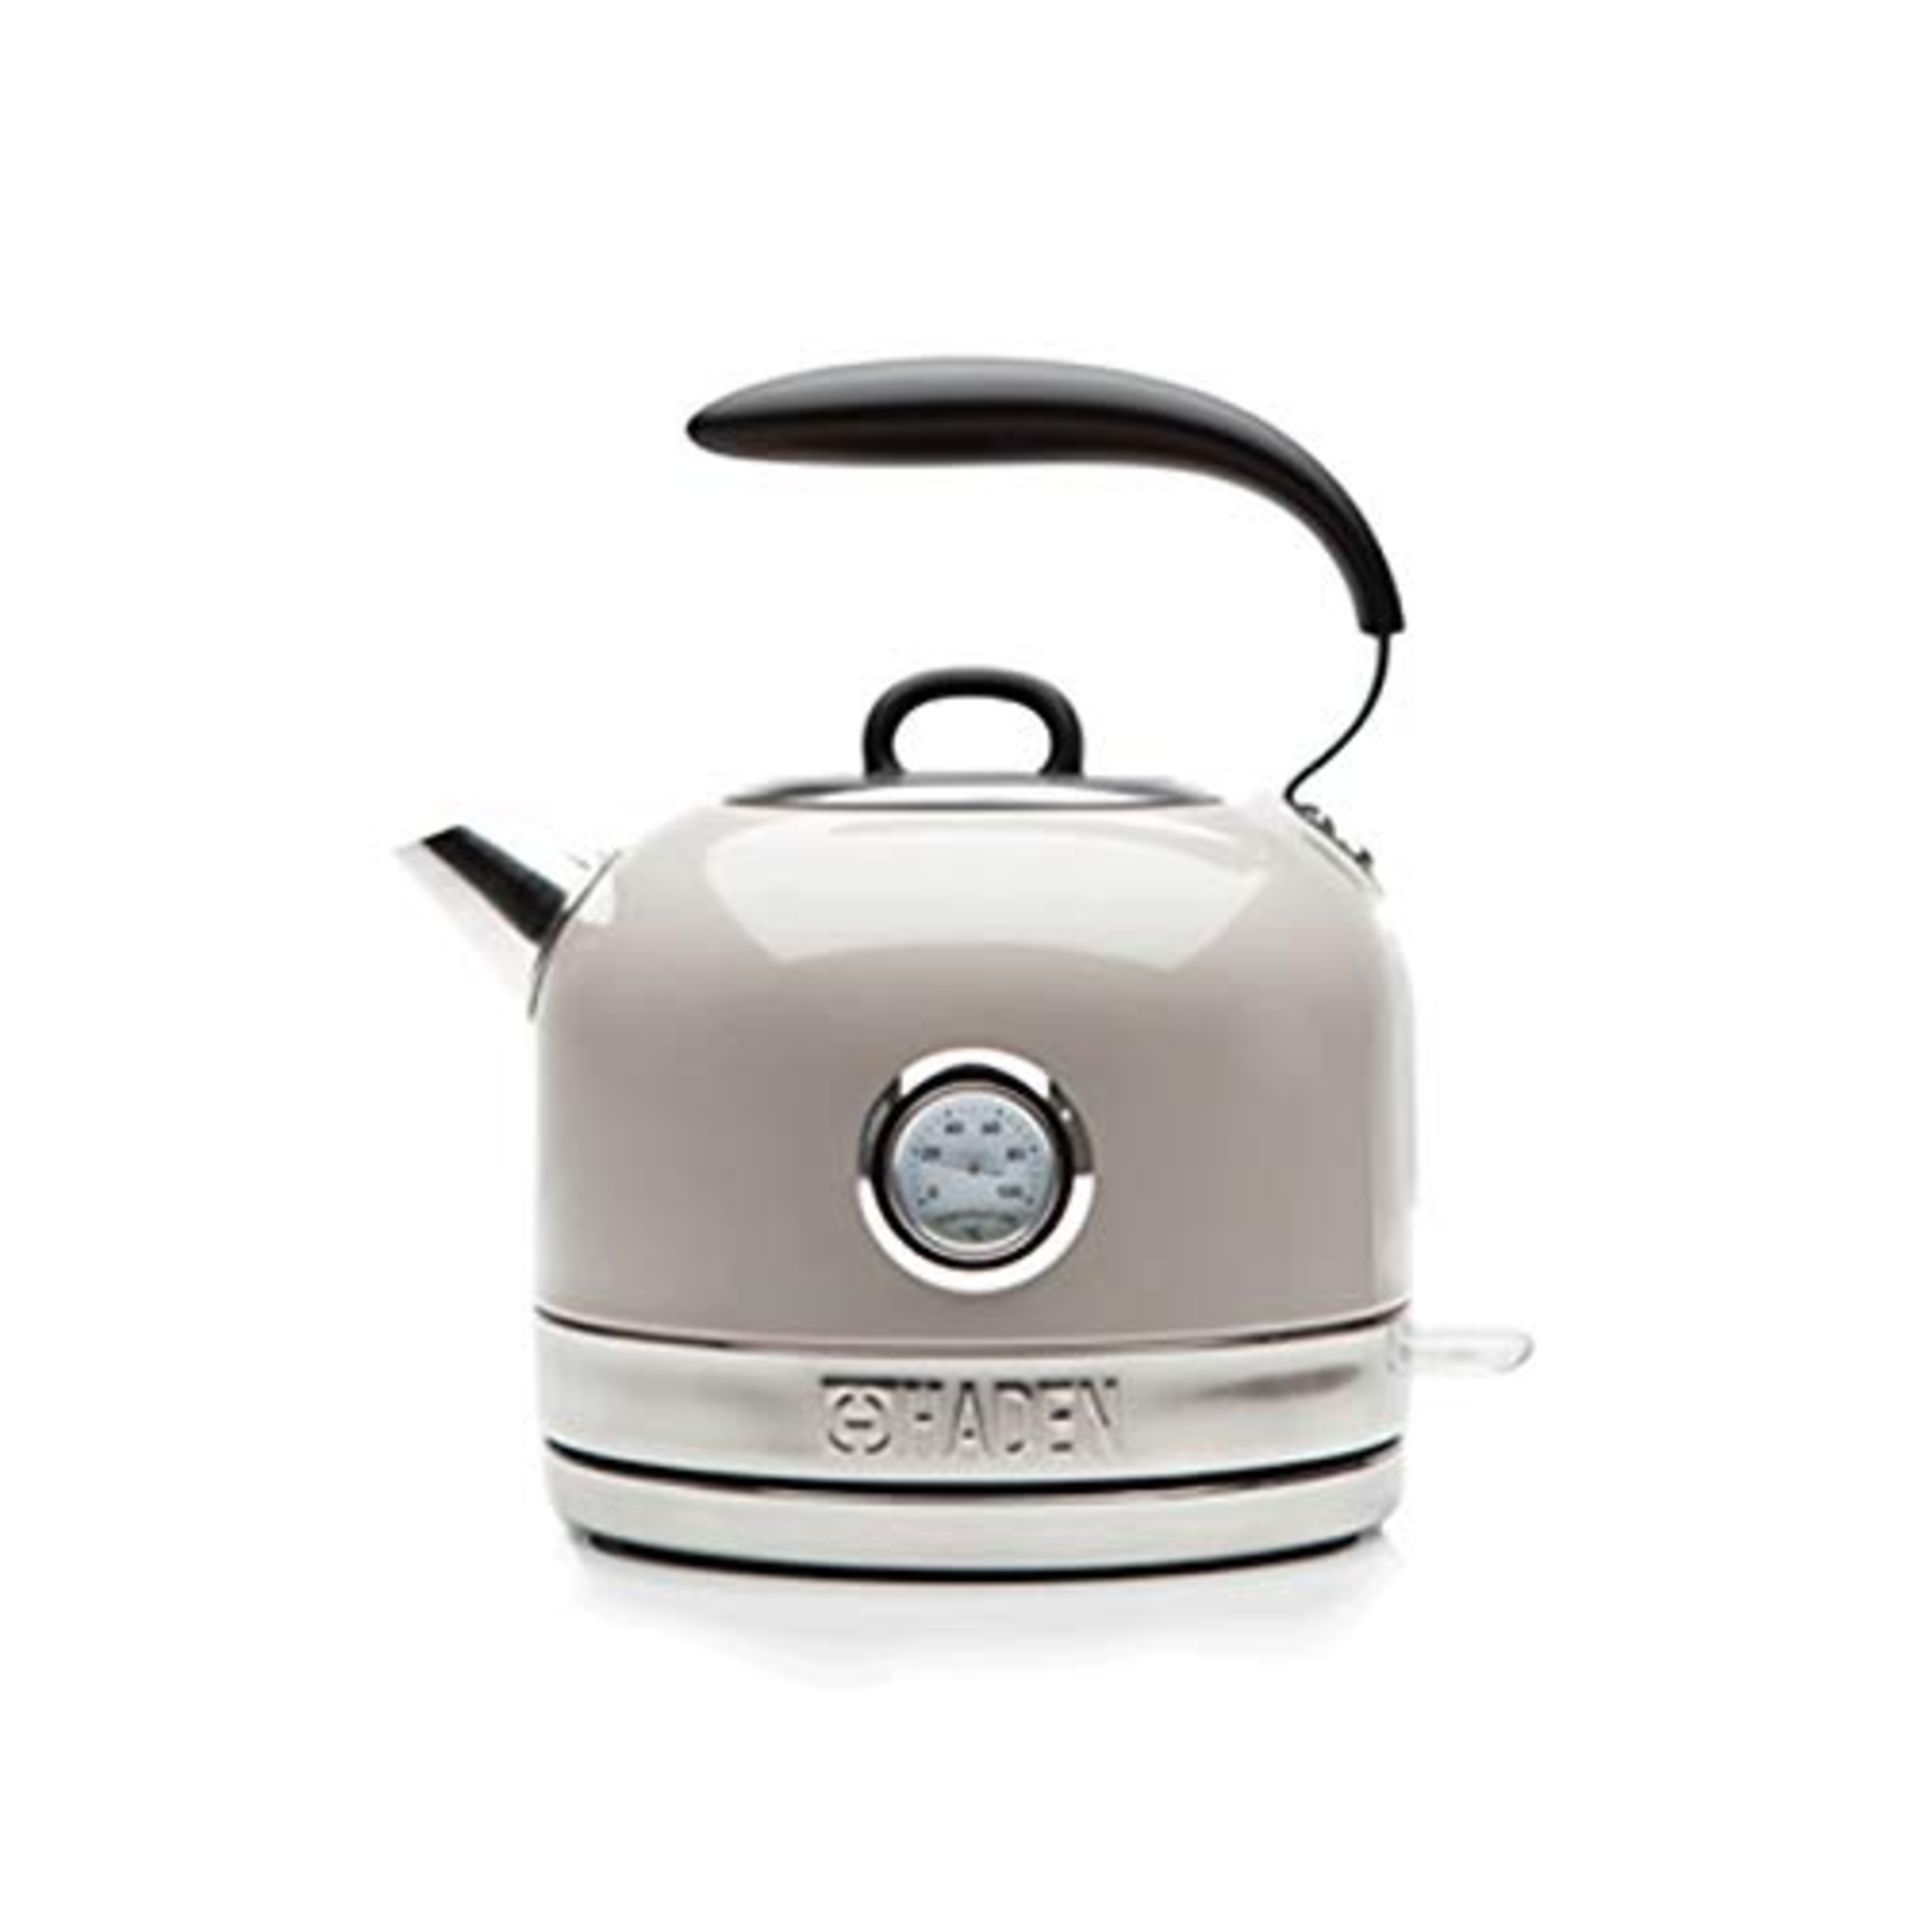 Haden 188830 Jersey Putty 1.5L Cordless Kettle with Temperature Gauge, BPA Free, 3000W